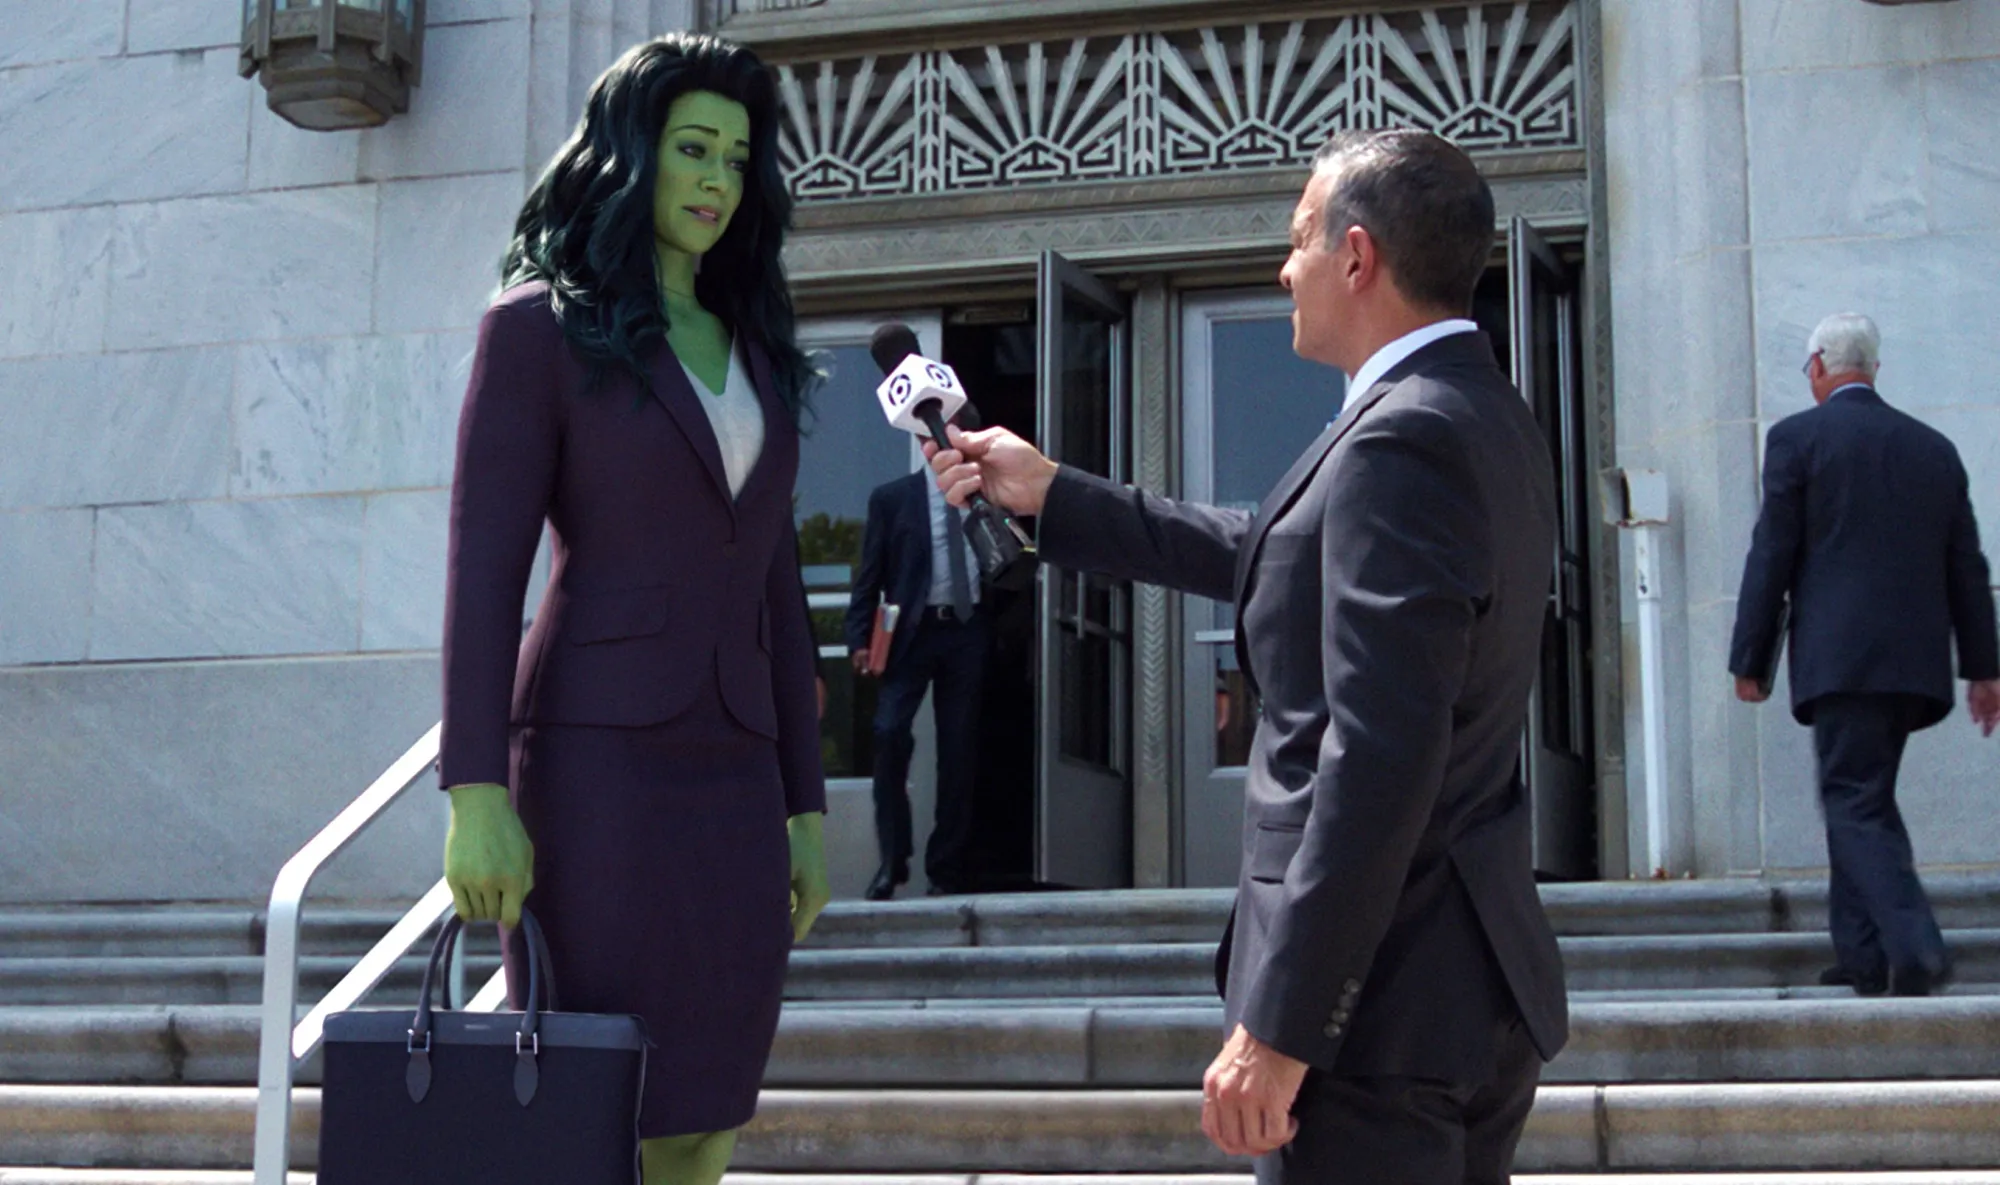 Jennifer Walters (Tatiana Maslany) stands on the courthouse steps speaking to a news reporter with a microphone.